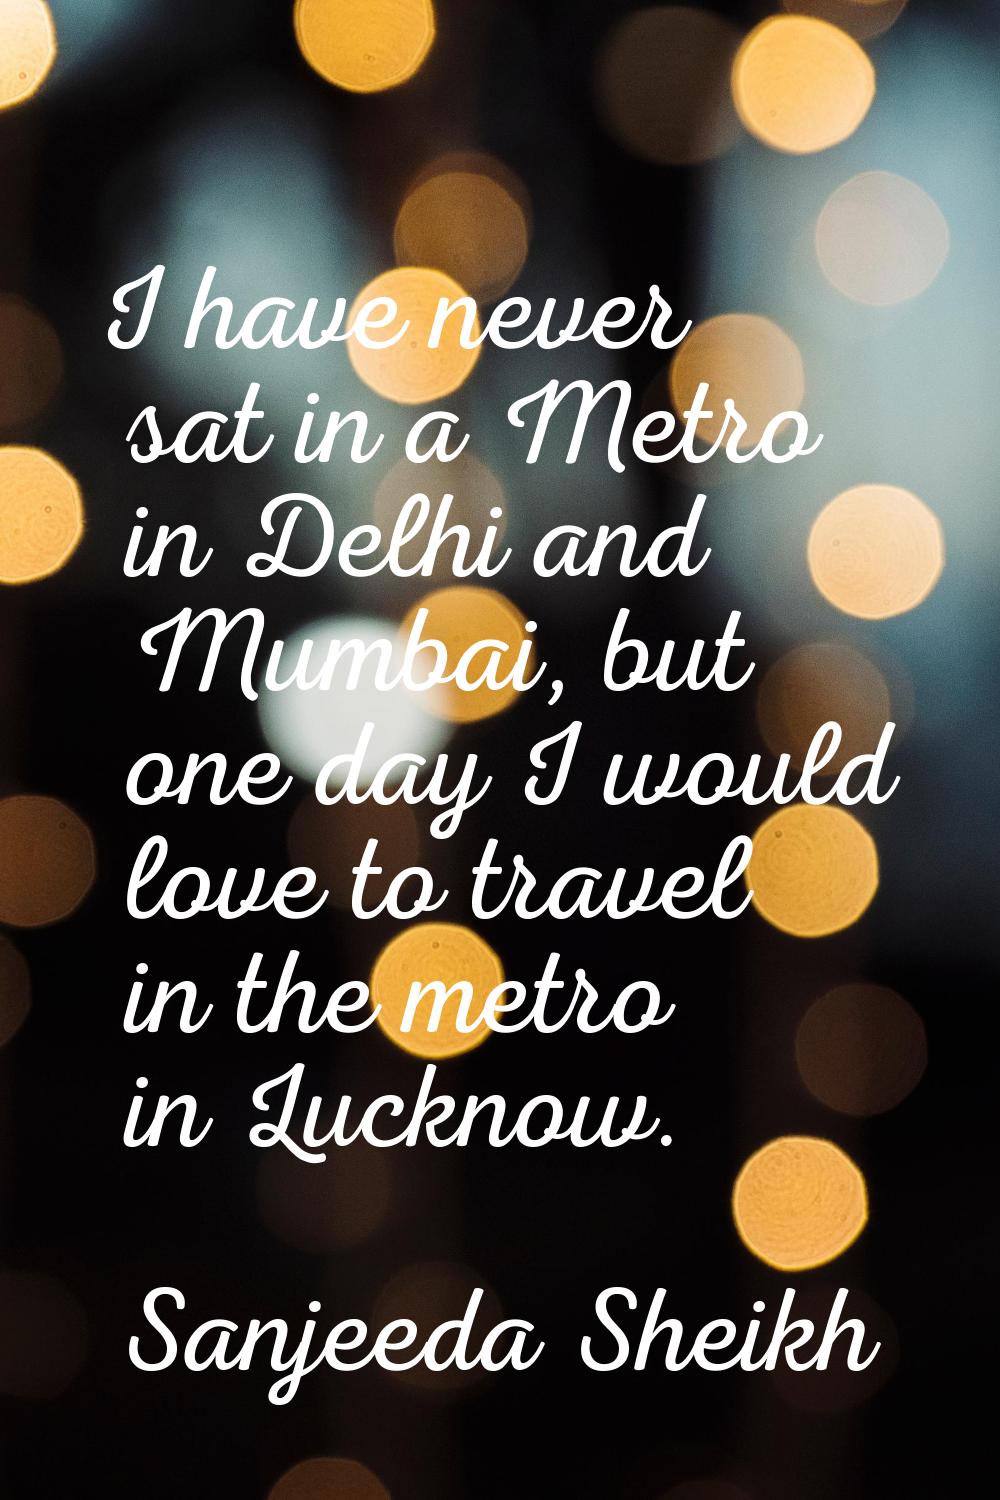 I have never sat in a Metro in Delhi and Mumbai, but one day I would love to travel in the metro in